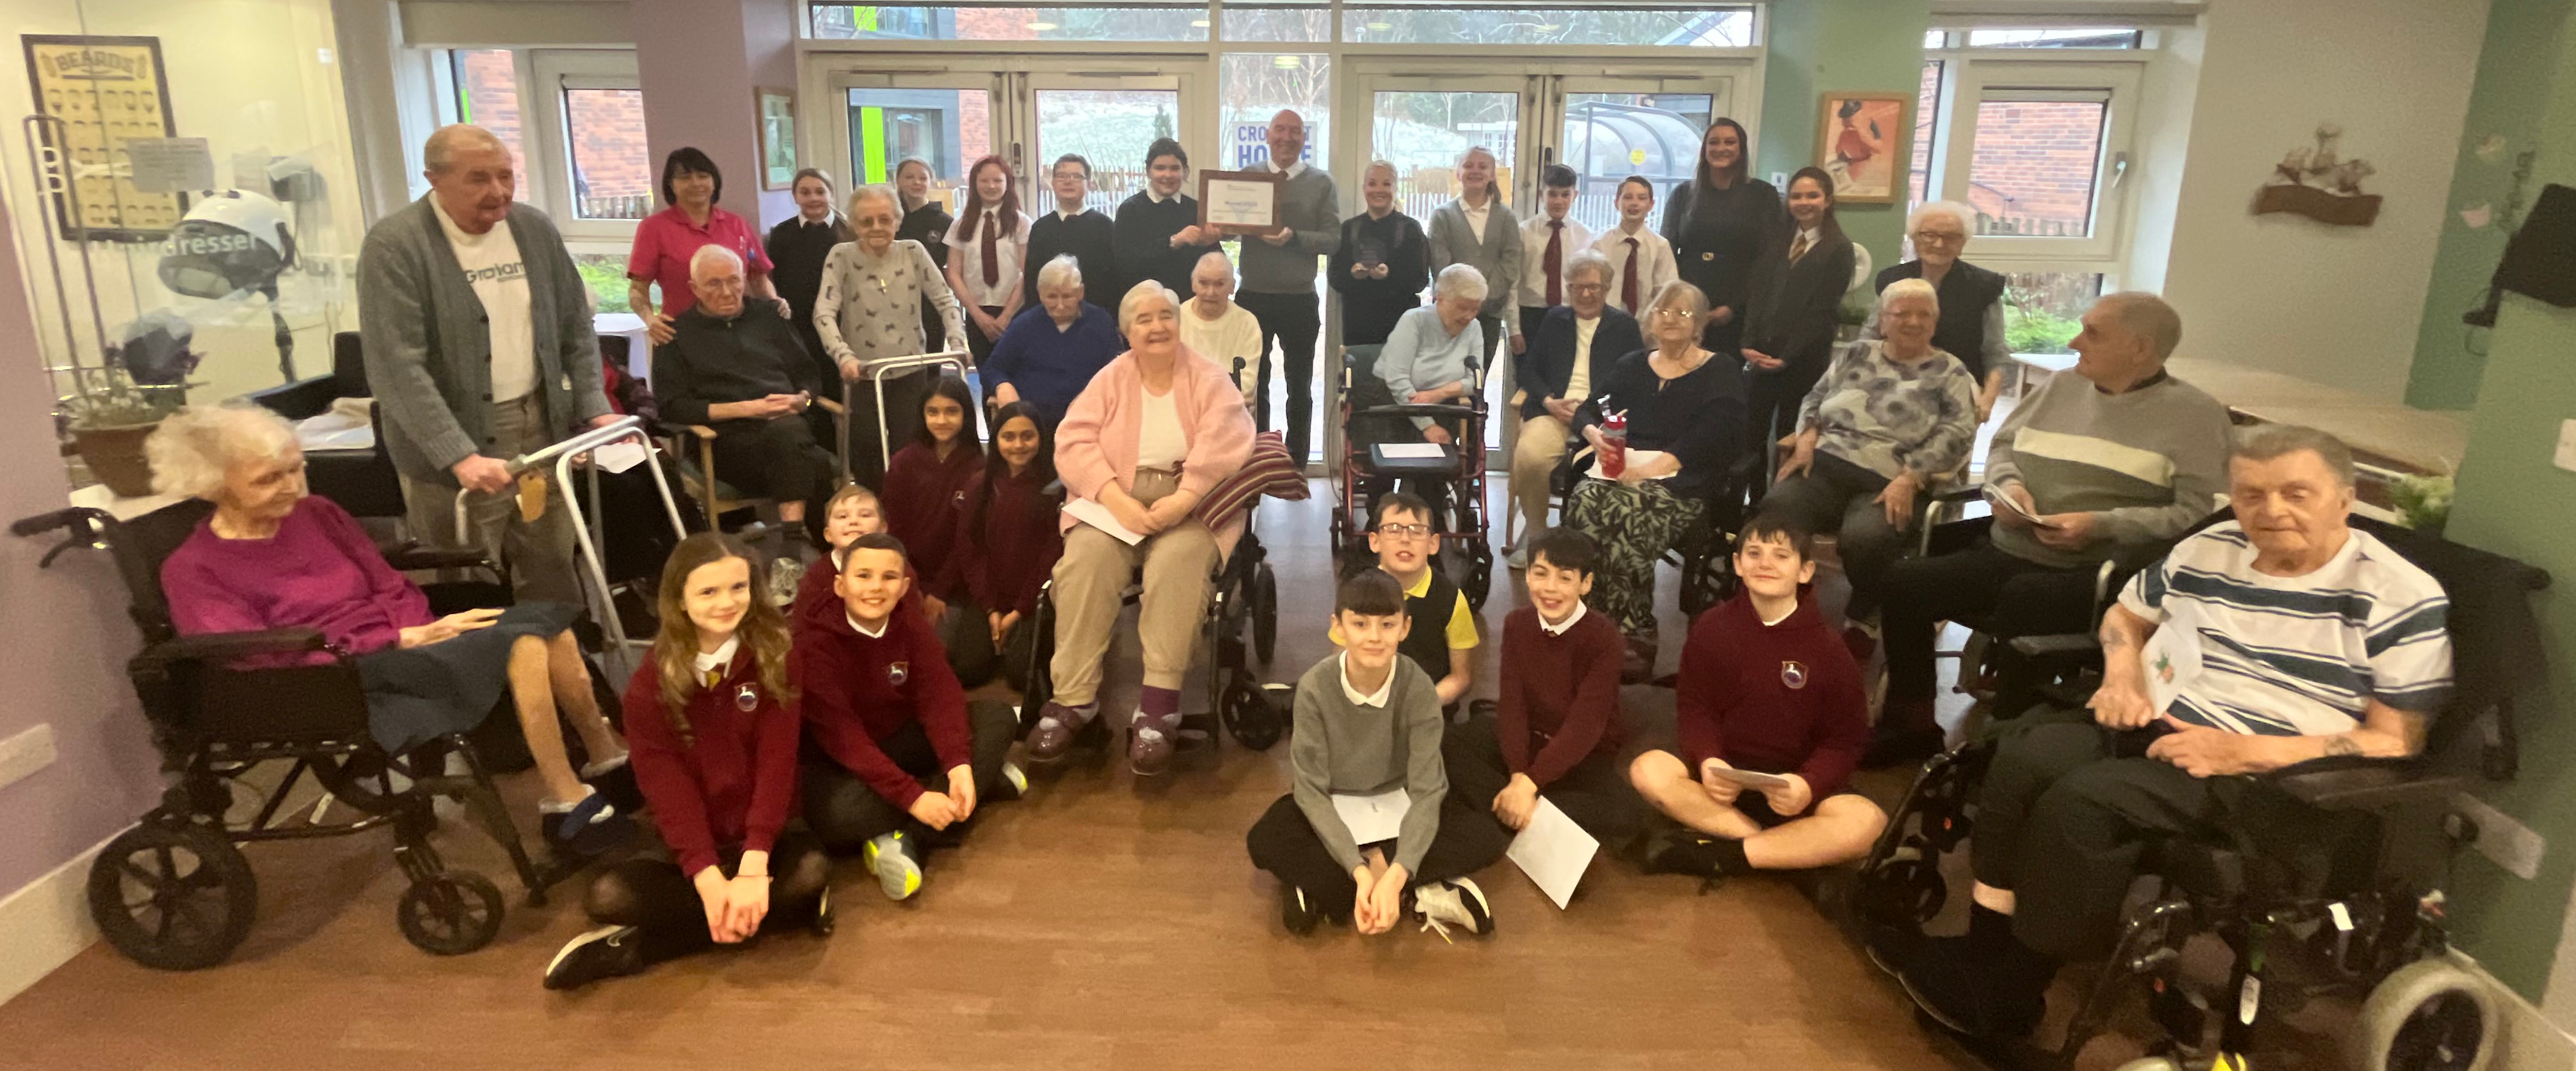 Crosslet house - Primary seven pupils have been visiting the residents in the care home